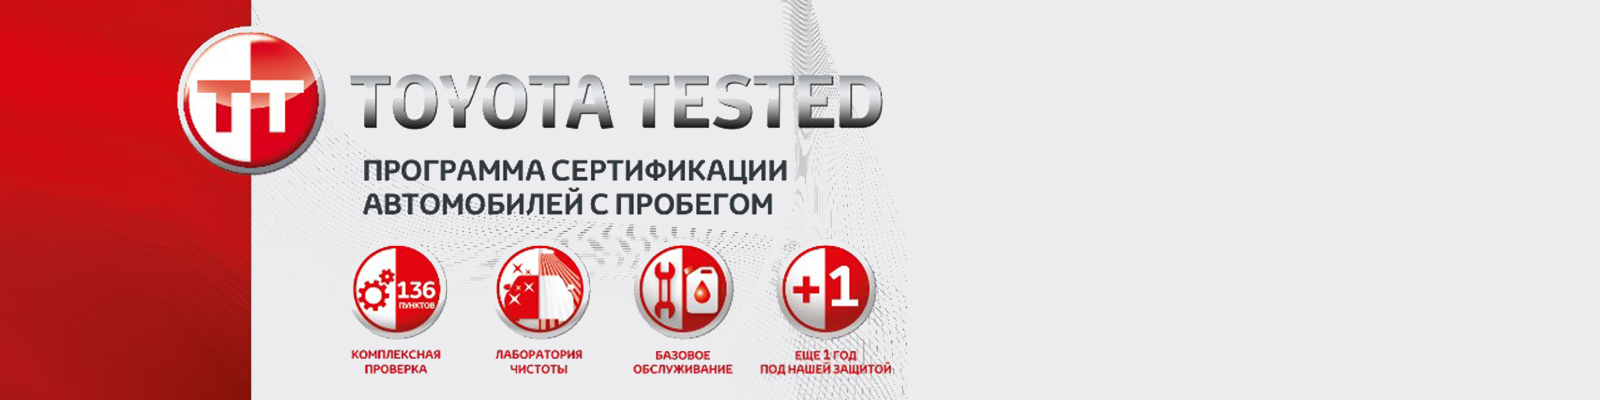 Toyota_Tested